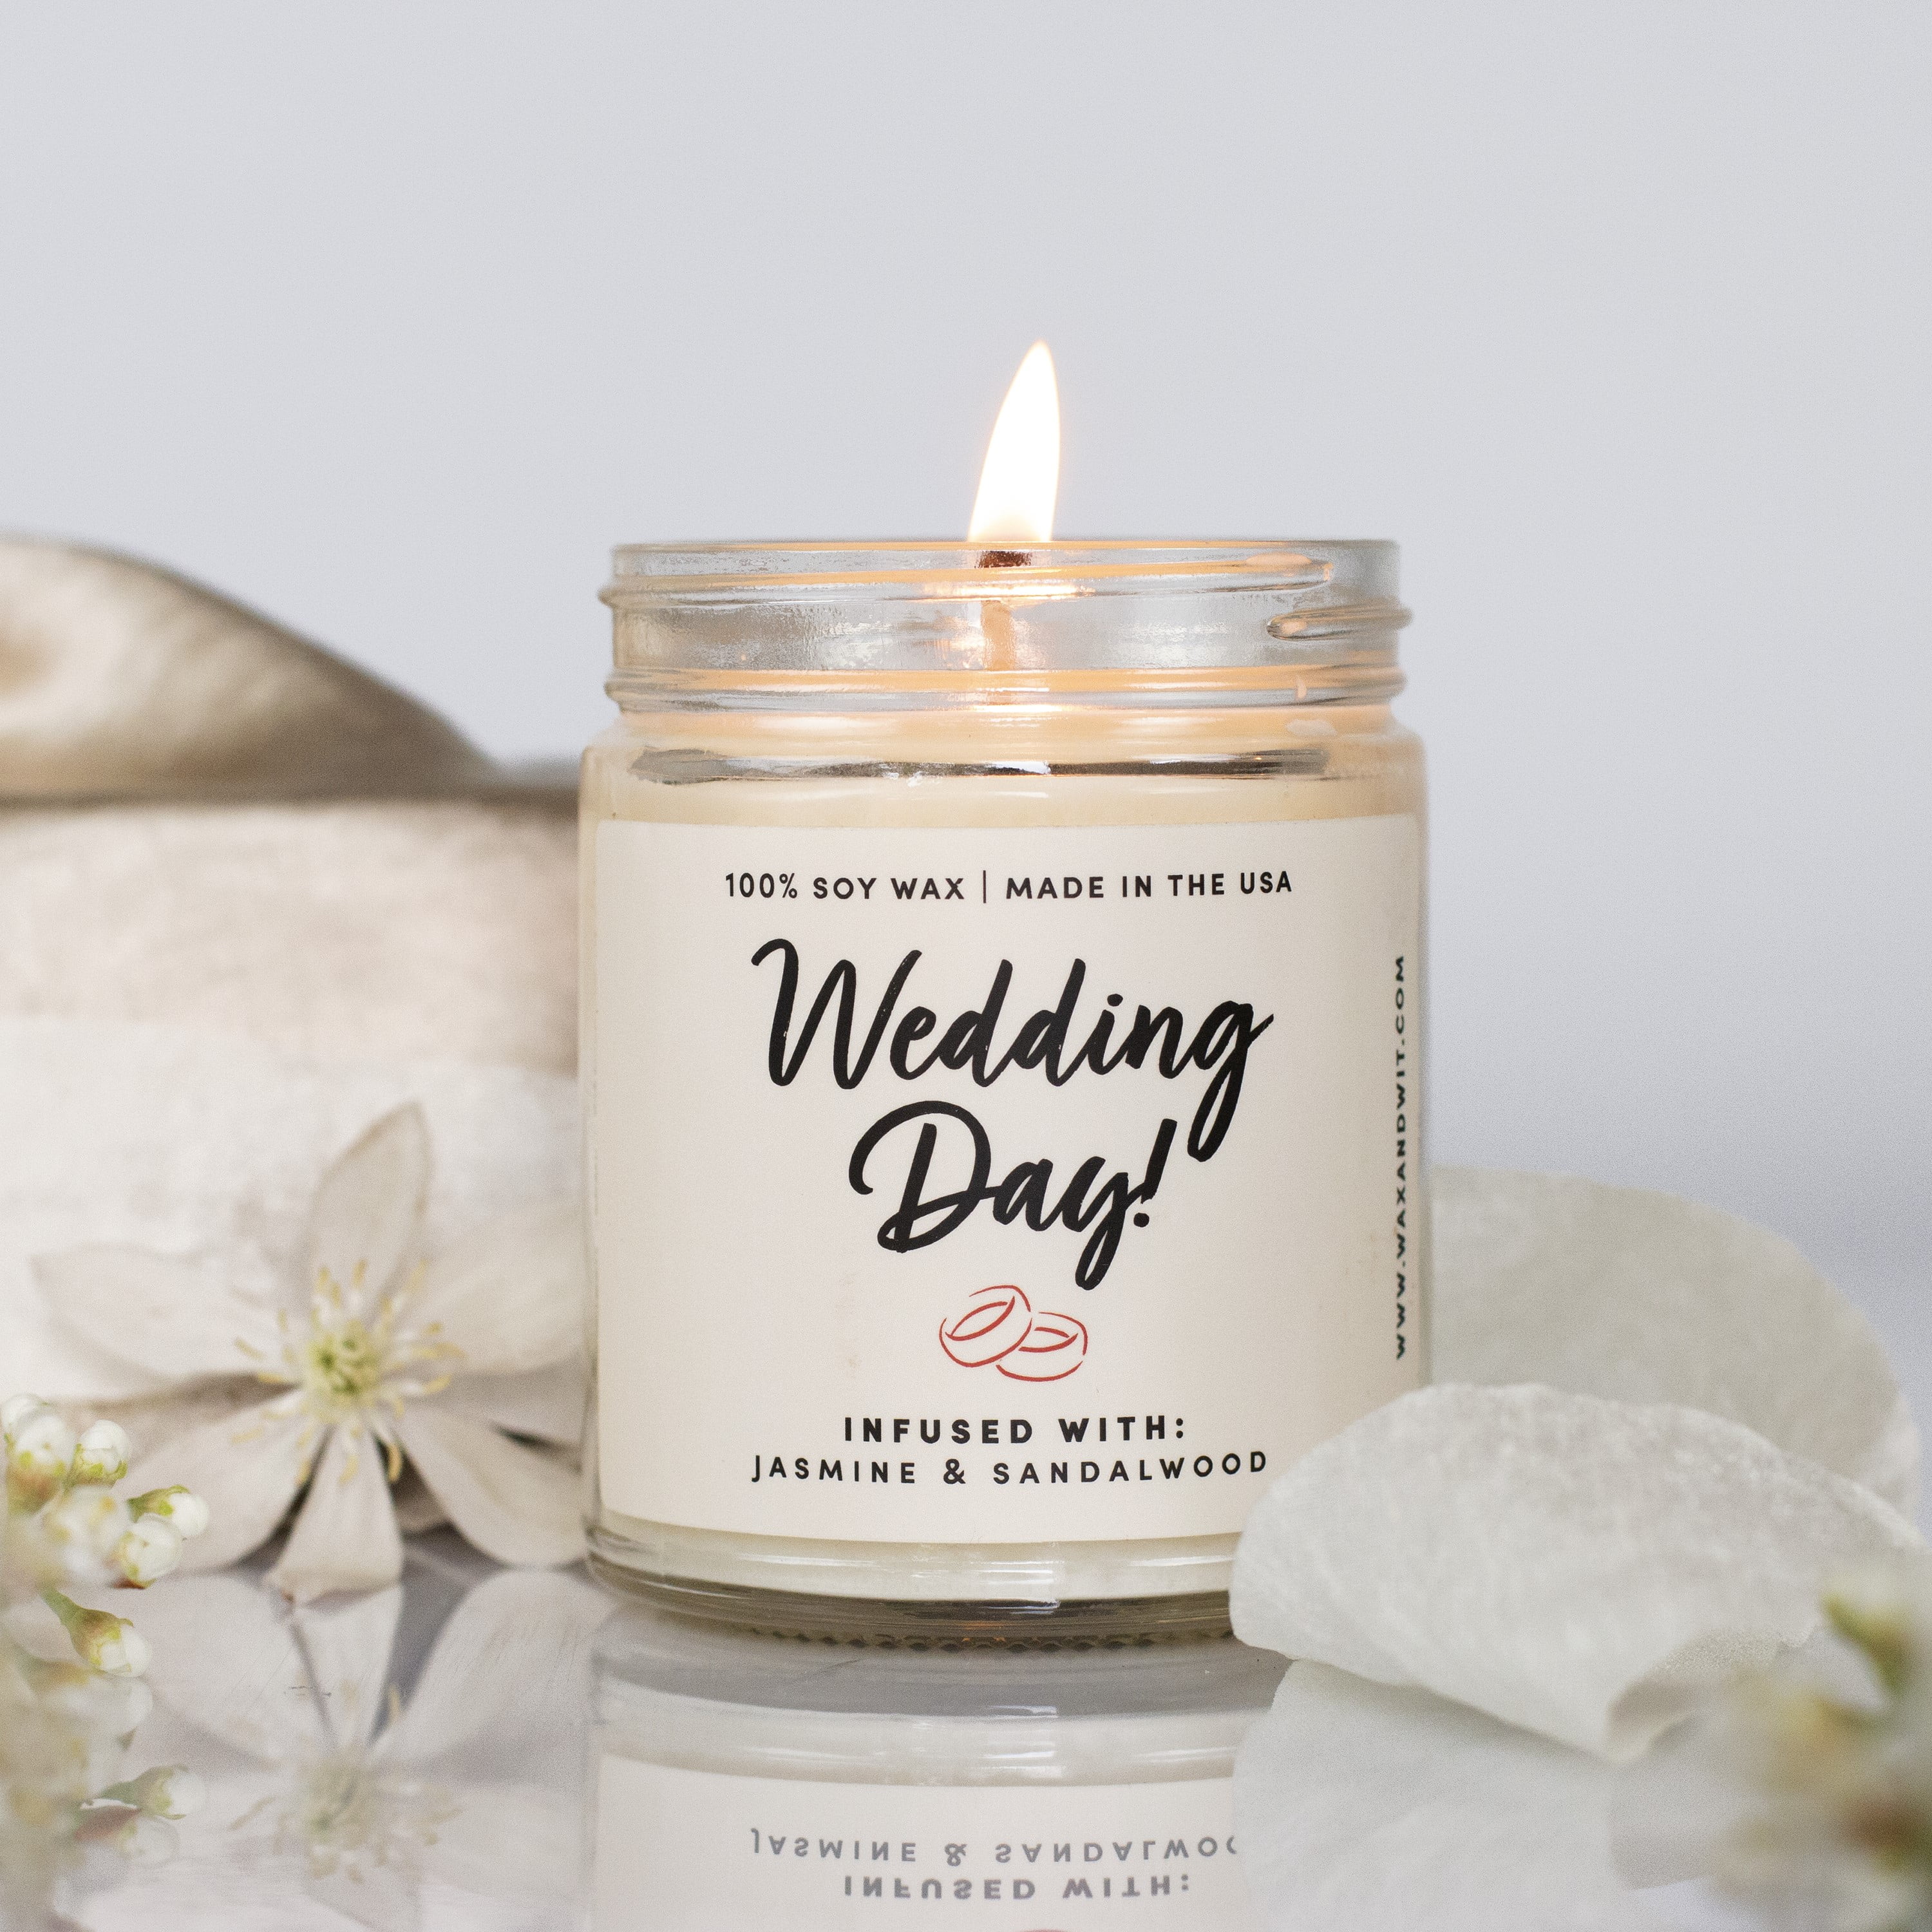 Giving Newlywed - Gift For Couples - Personalized Scented Candle